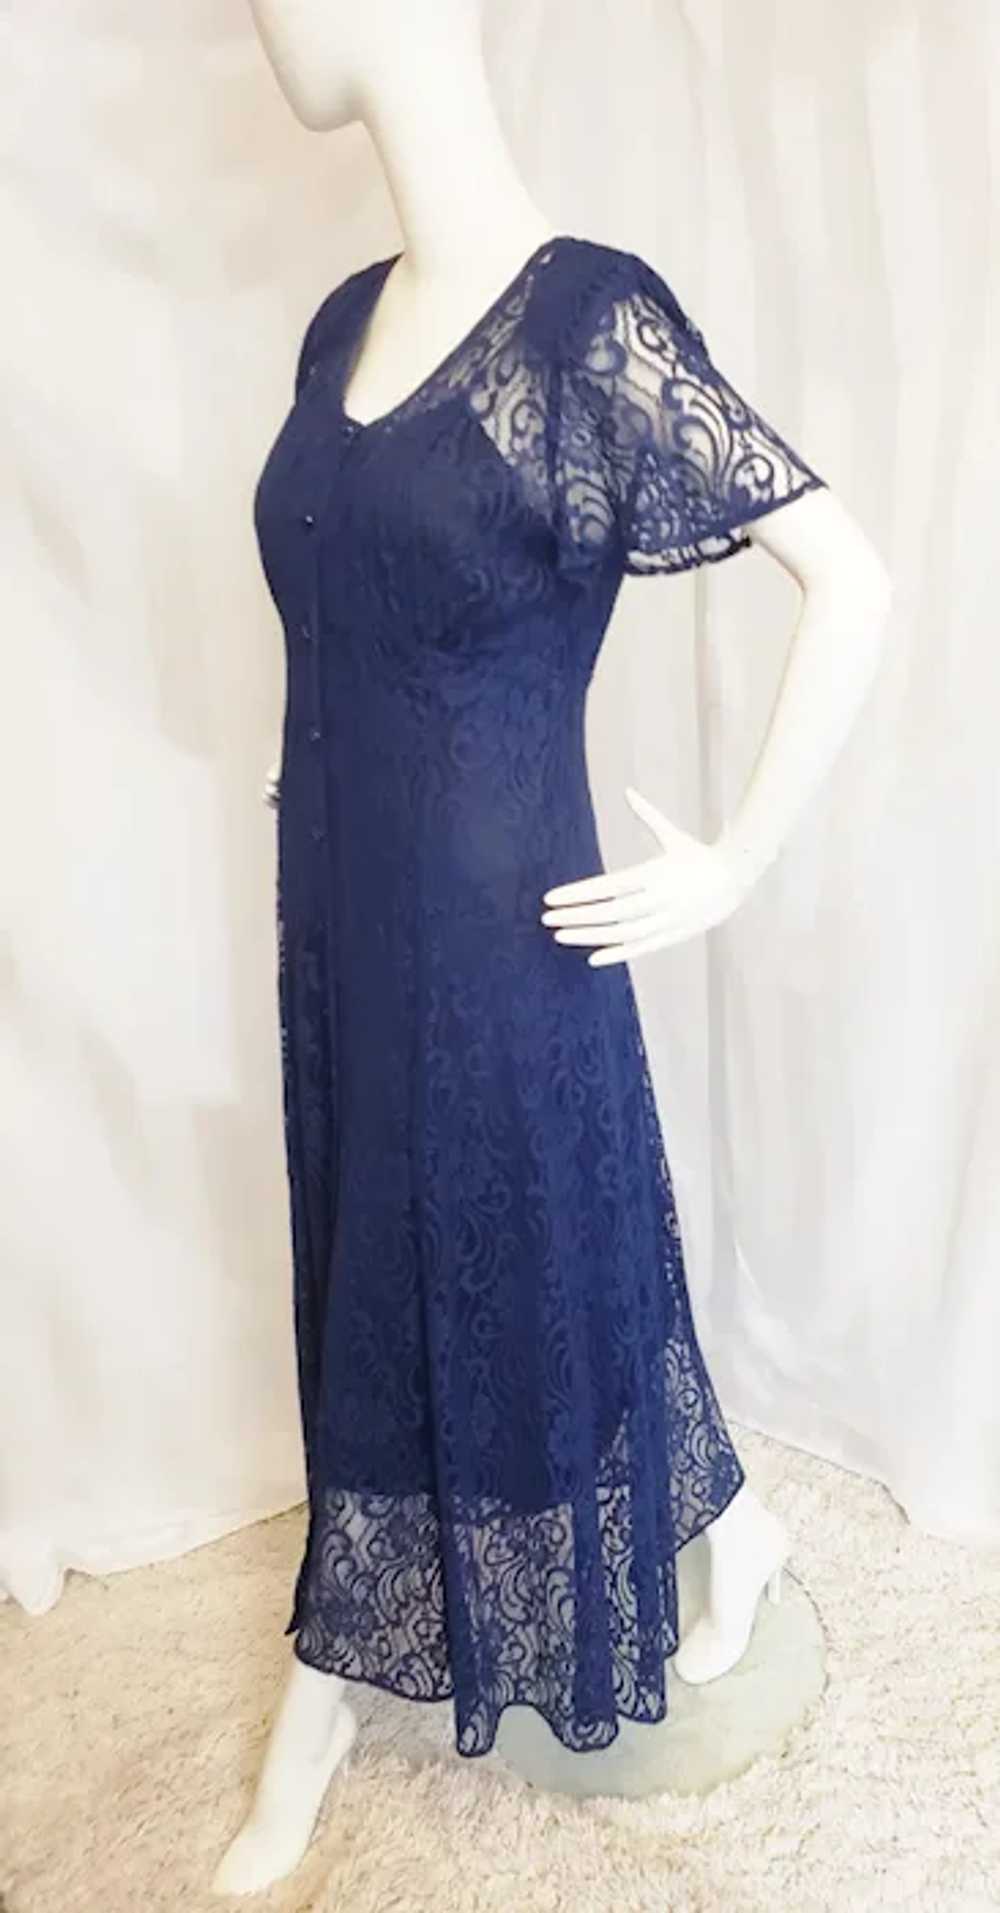 Romantic Lovely Lace Maxi Dress - image 6